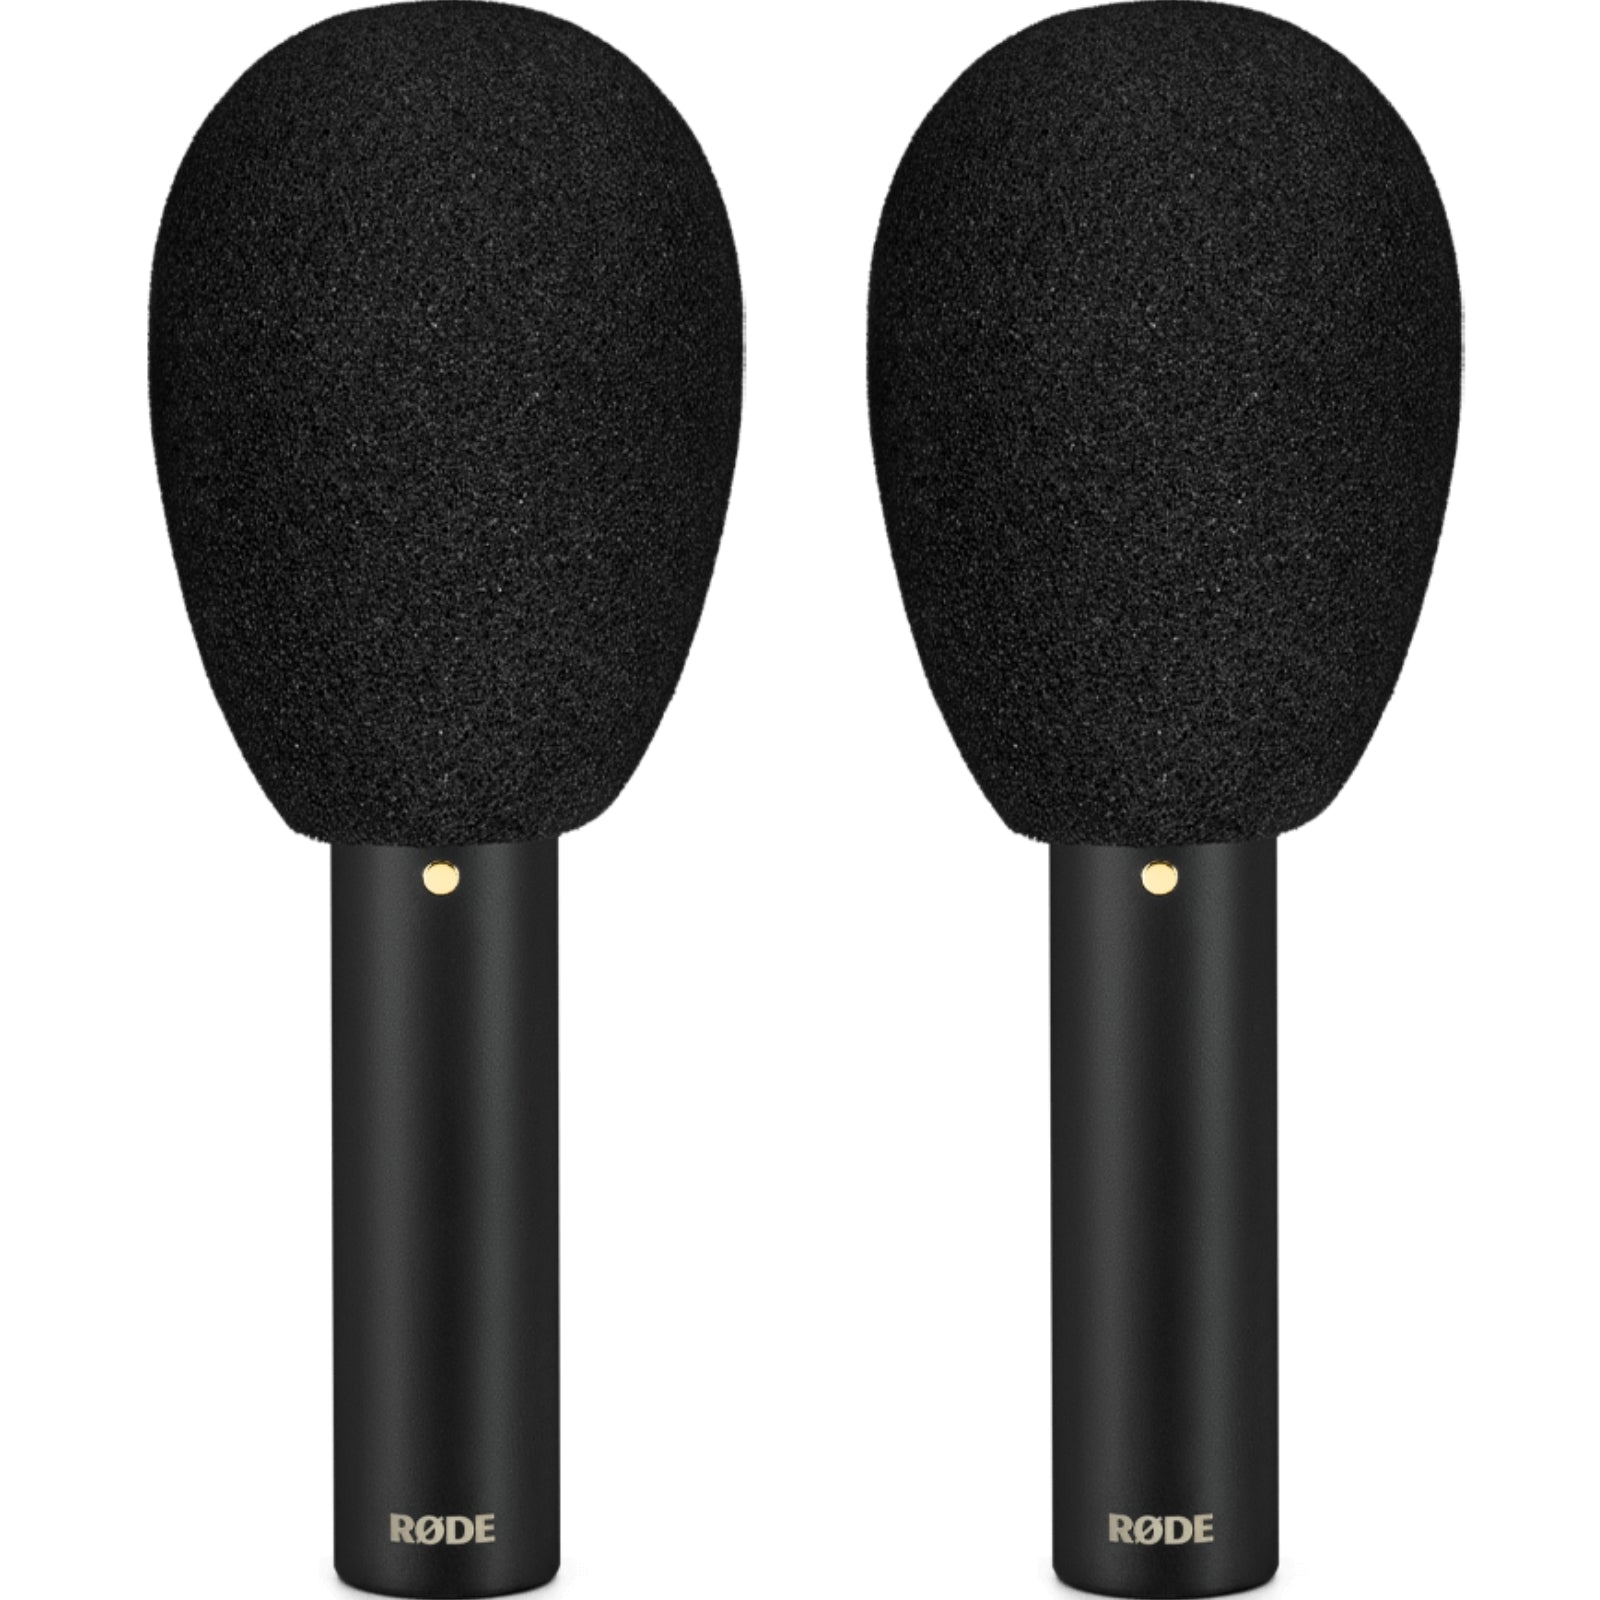 Rode TF-5 MP Cardioid Condenser Microphones - MyMobile